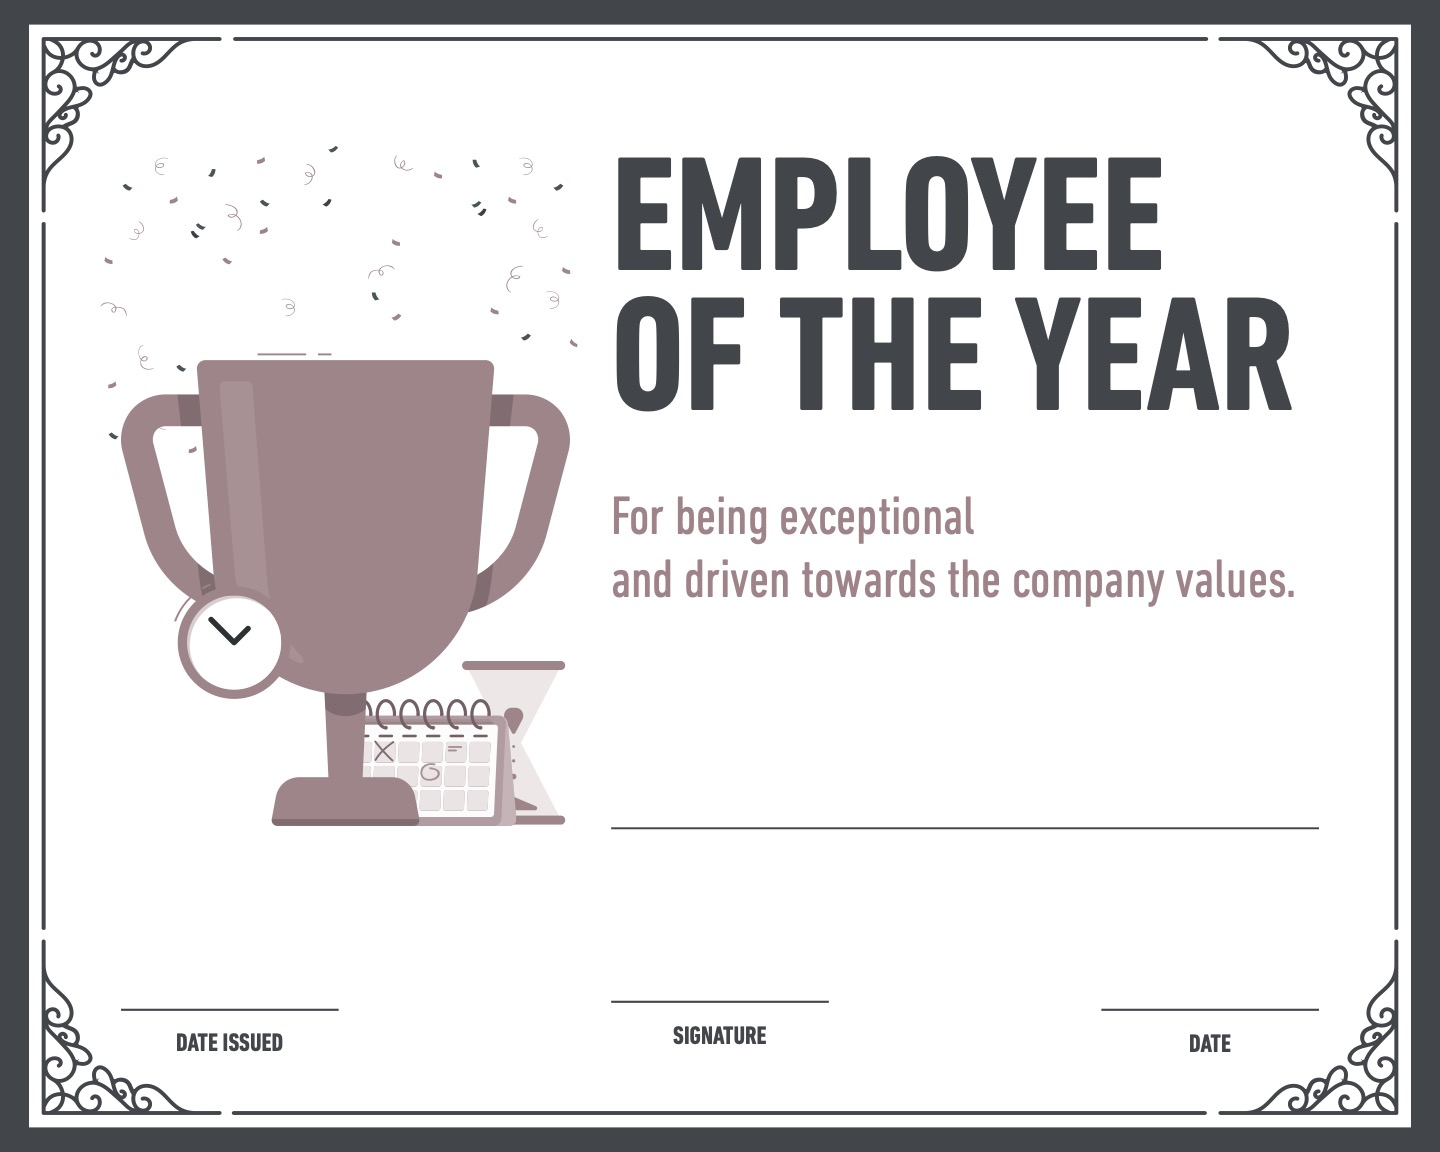 10 Amazing Award Certificate Templates in 10 - Recognize Intended For Employee Of The Year Certificate Template Free